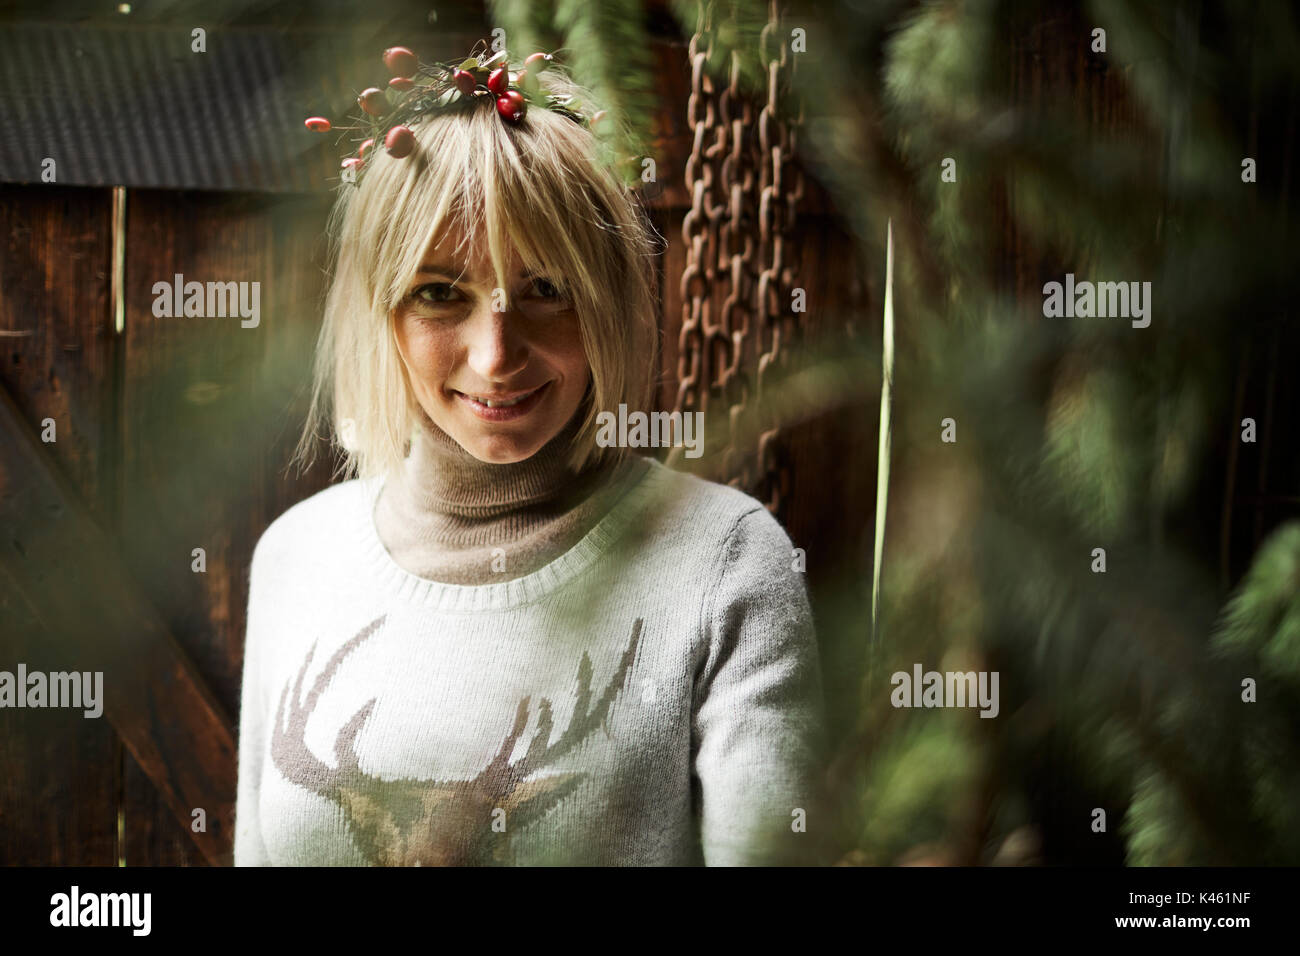 Blond woman, headdress, garland with rose hips, twigs of evergreens for decoration, portrait, Stock Photo